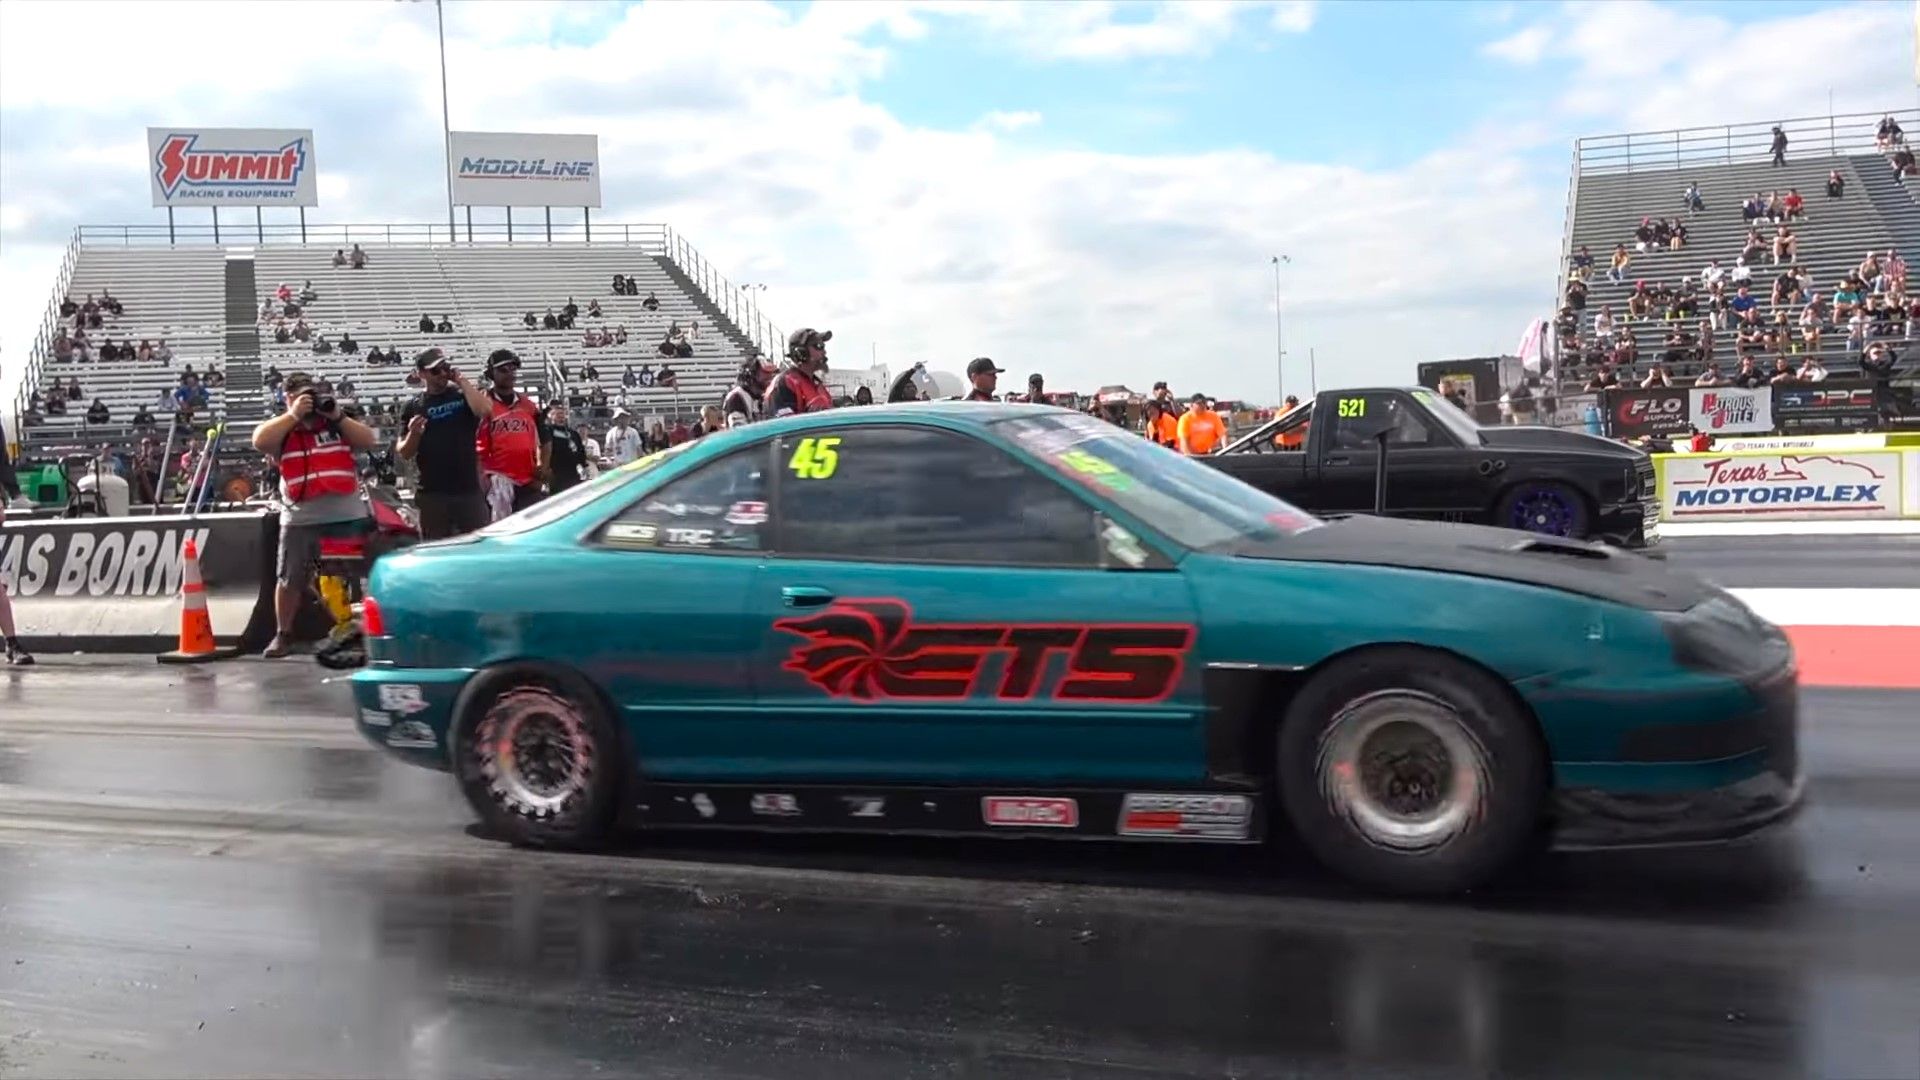 A teal 1994 Acura Integra GS-R - world's fastest Integra drag racing front side shot